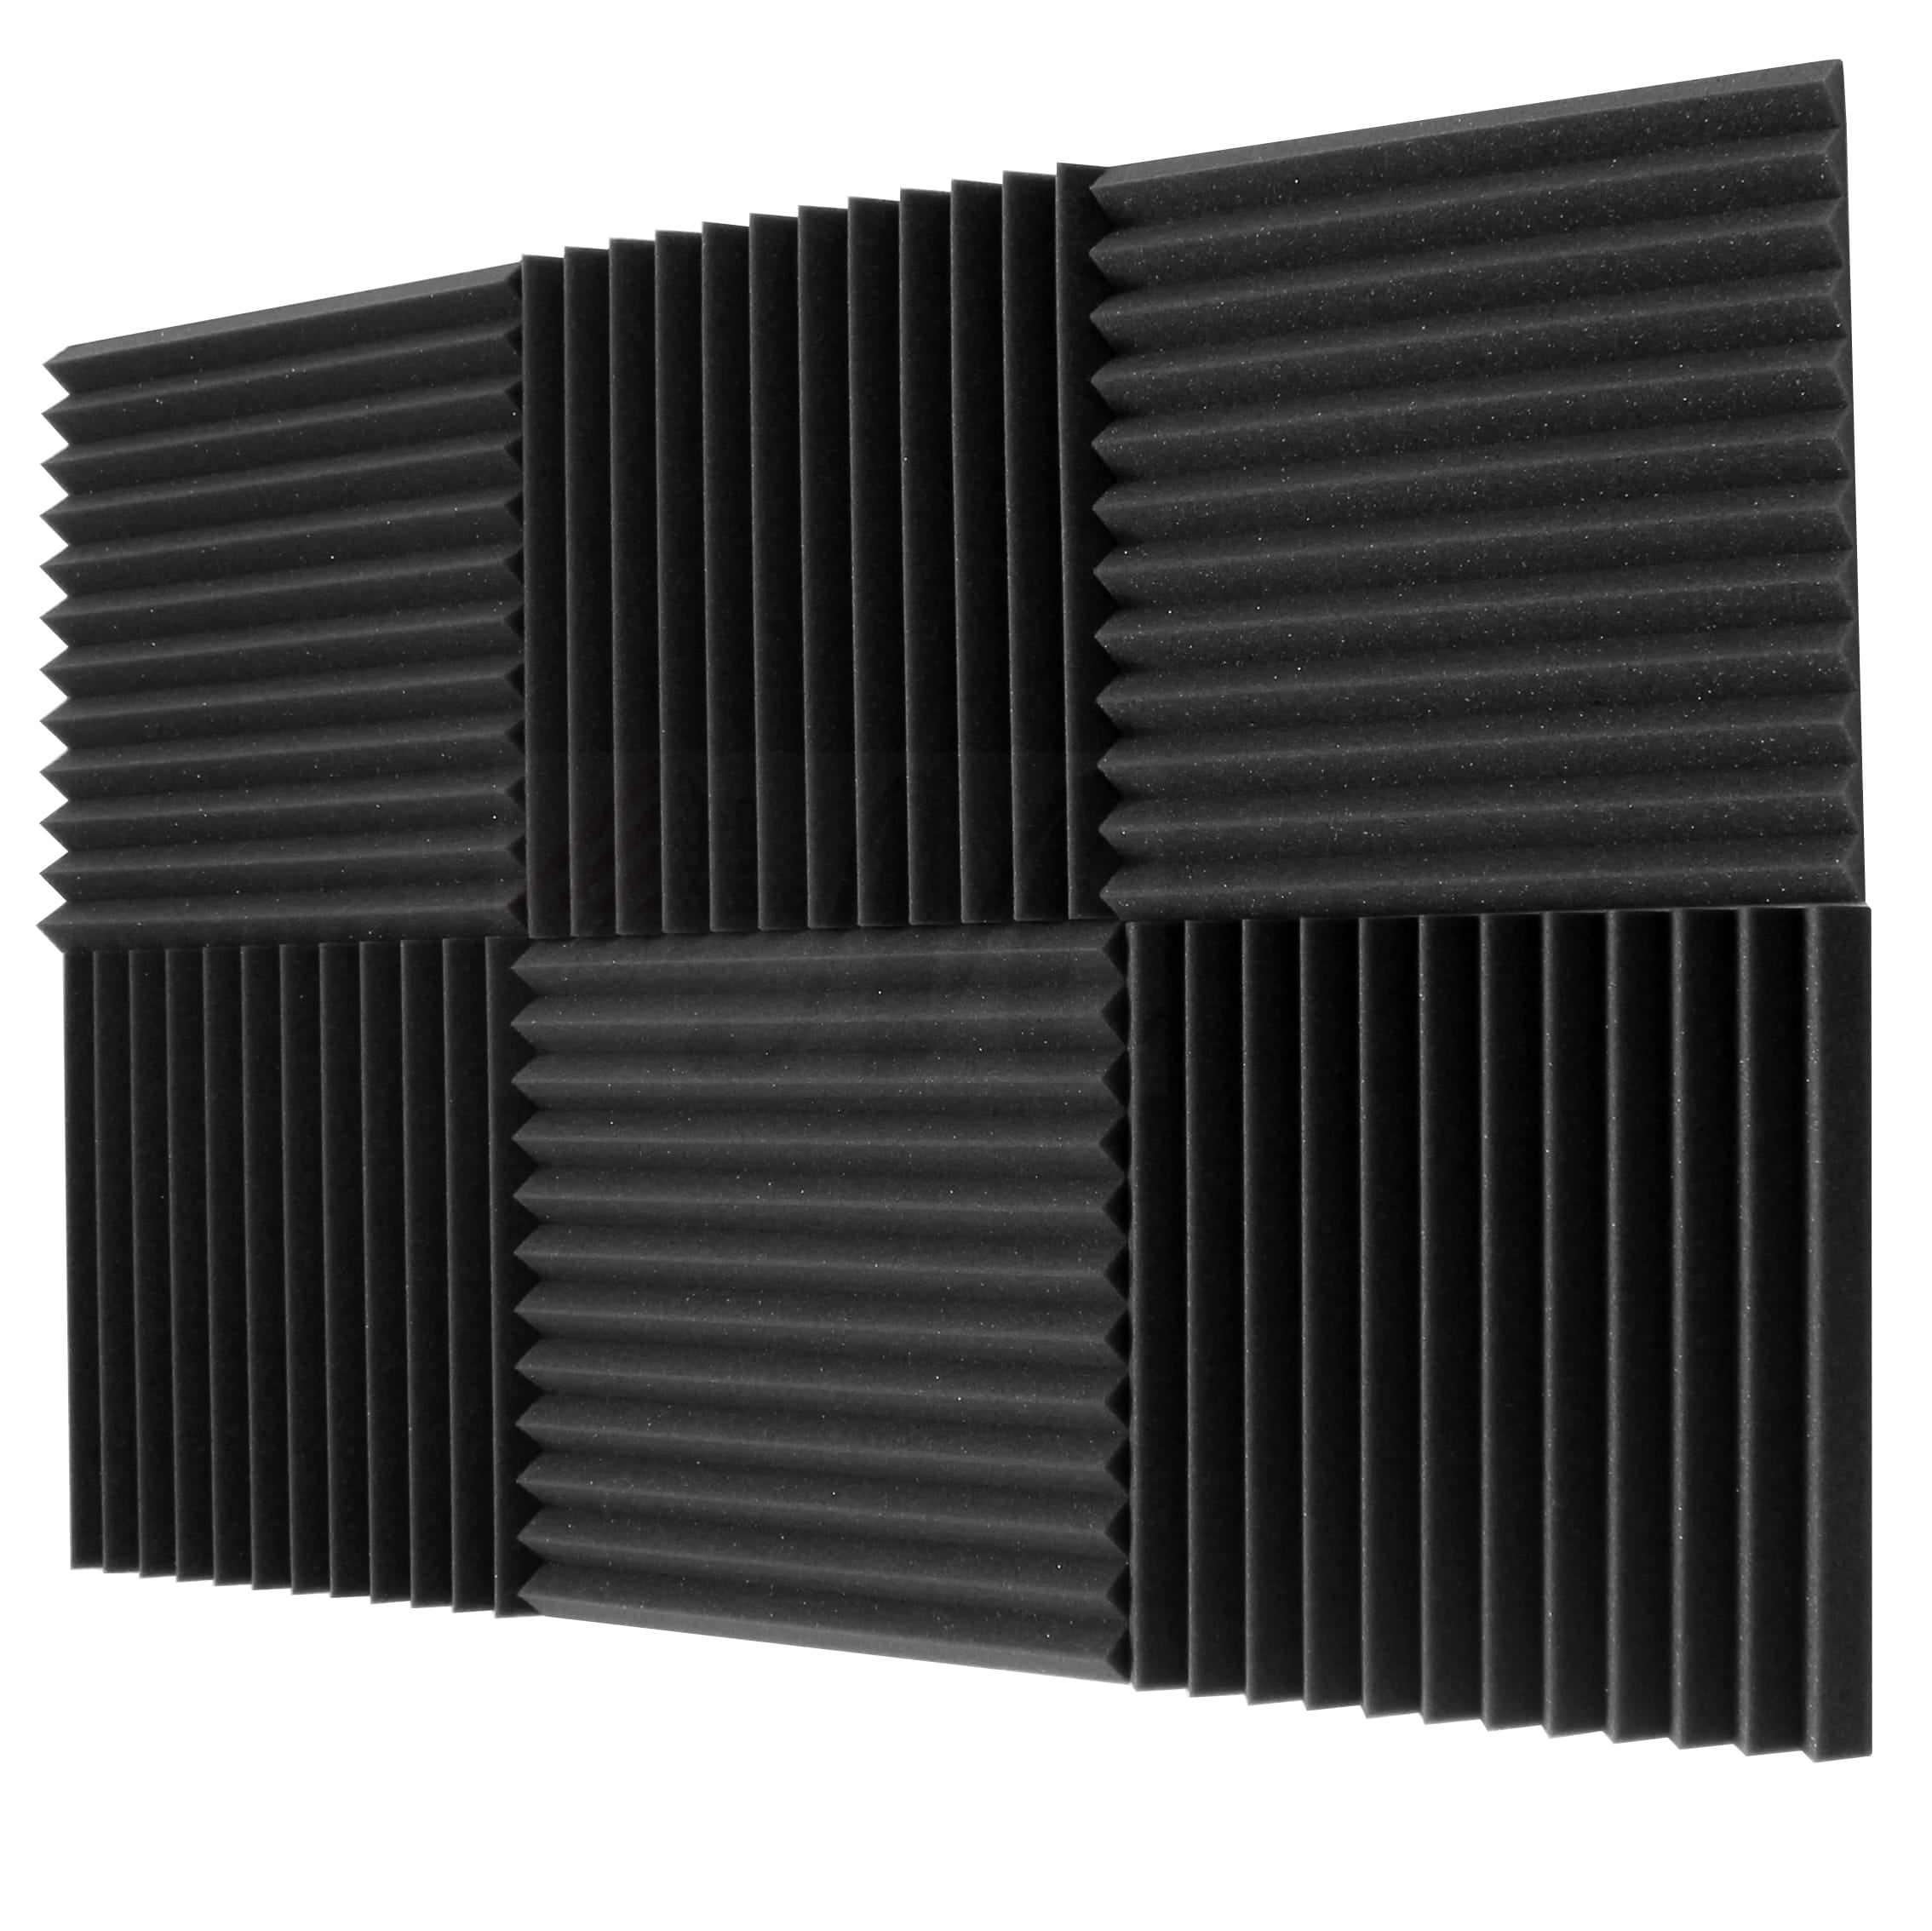 12 Pack, Black 2 inches Acoustic Foam Panels 12 Pack 12 x 12 x 2 Sound Absorbing Panels Studio Foam Wedges for Reducing echoes